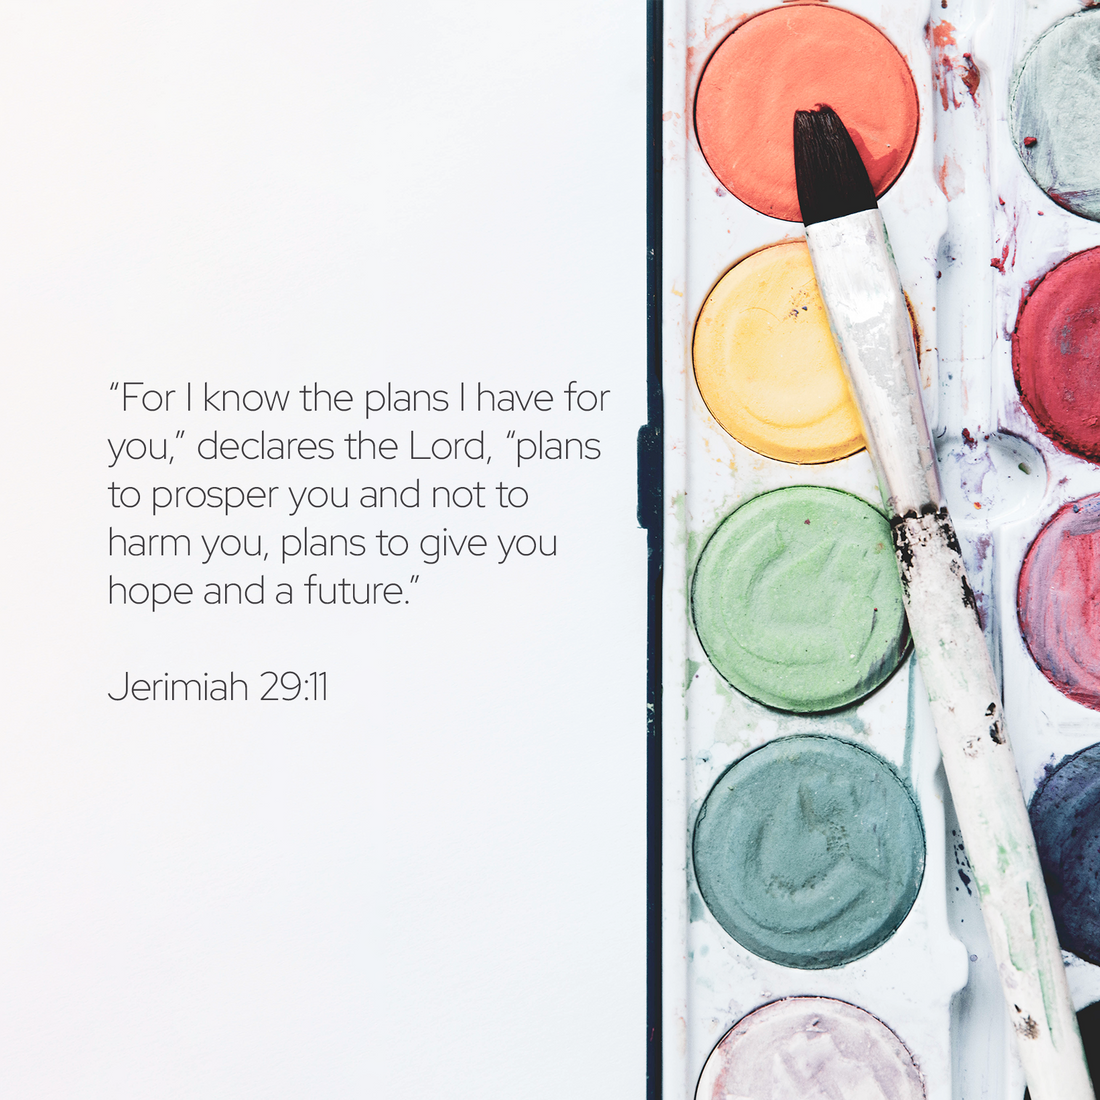 Jeremiah 29:11 " For I know the plans I have for you,” declares the Lord, “plans to prosper you and not to harm you, plans to give you hope and a future" written out next to watercolor paint supplies 